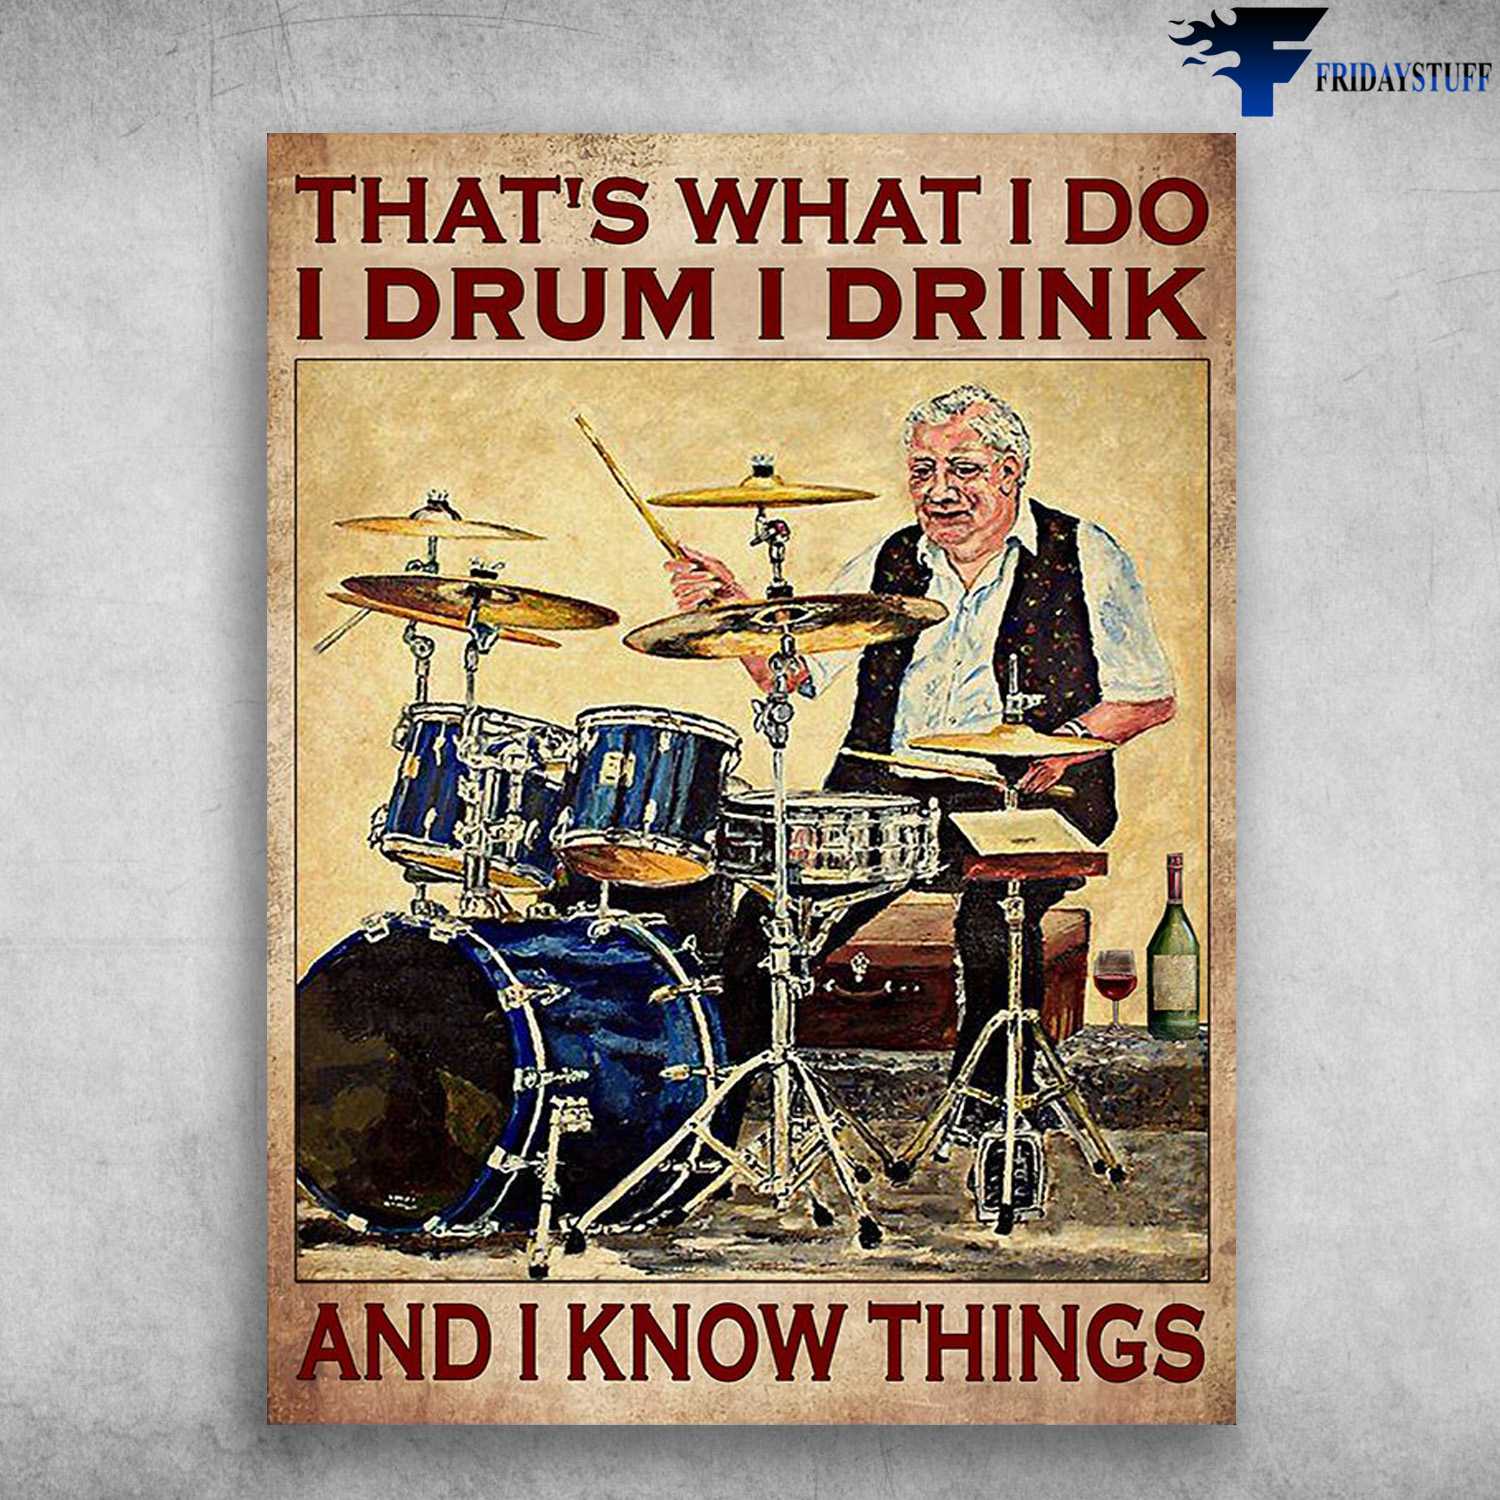 Old Man Drumming, Drummer Poster - That's What I Do, I Drum, I Drink, And I Know Things